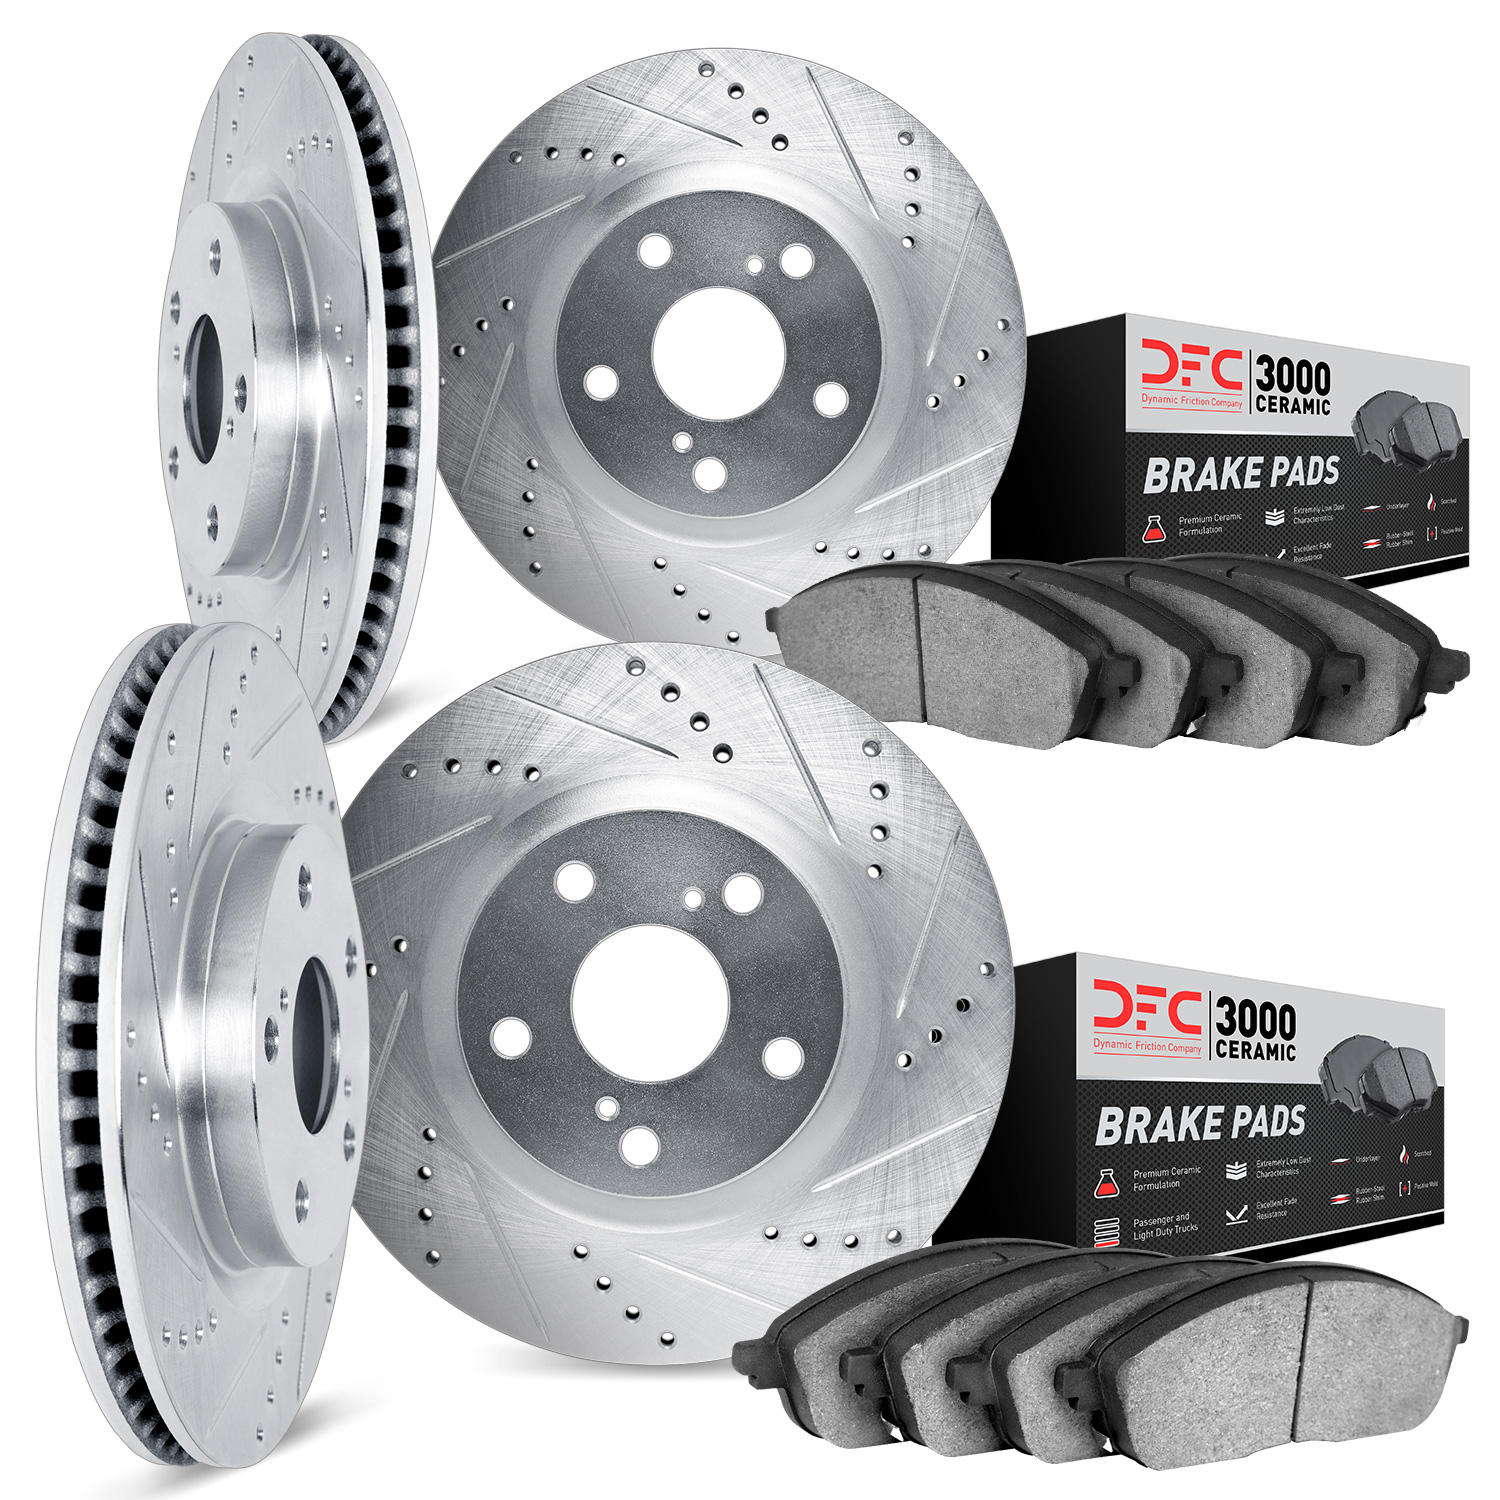 7304-58010 Drilled/Slotted Brake Rotor with 3000-Series Ceramic Brake Pads Kit [Silver], 2005-2012 Acura/Honda, Position: Front